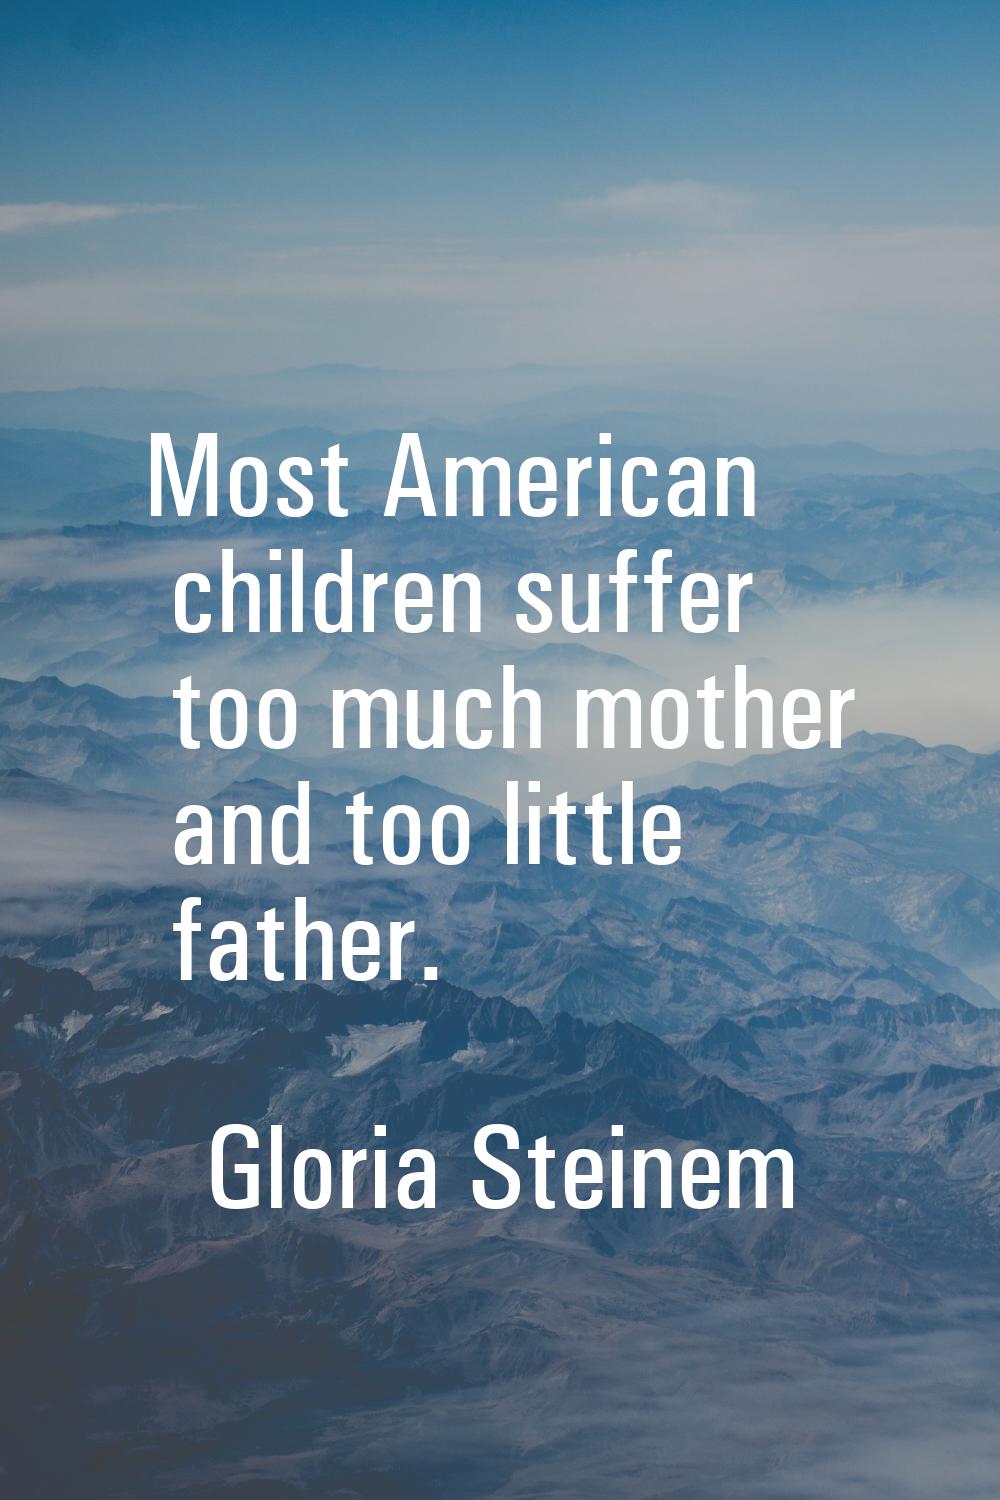 Most American children suffer too much mother and too little father.